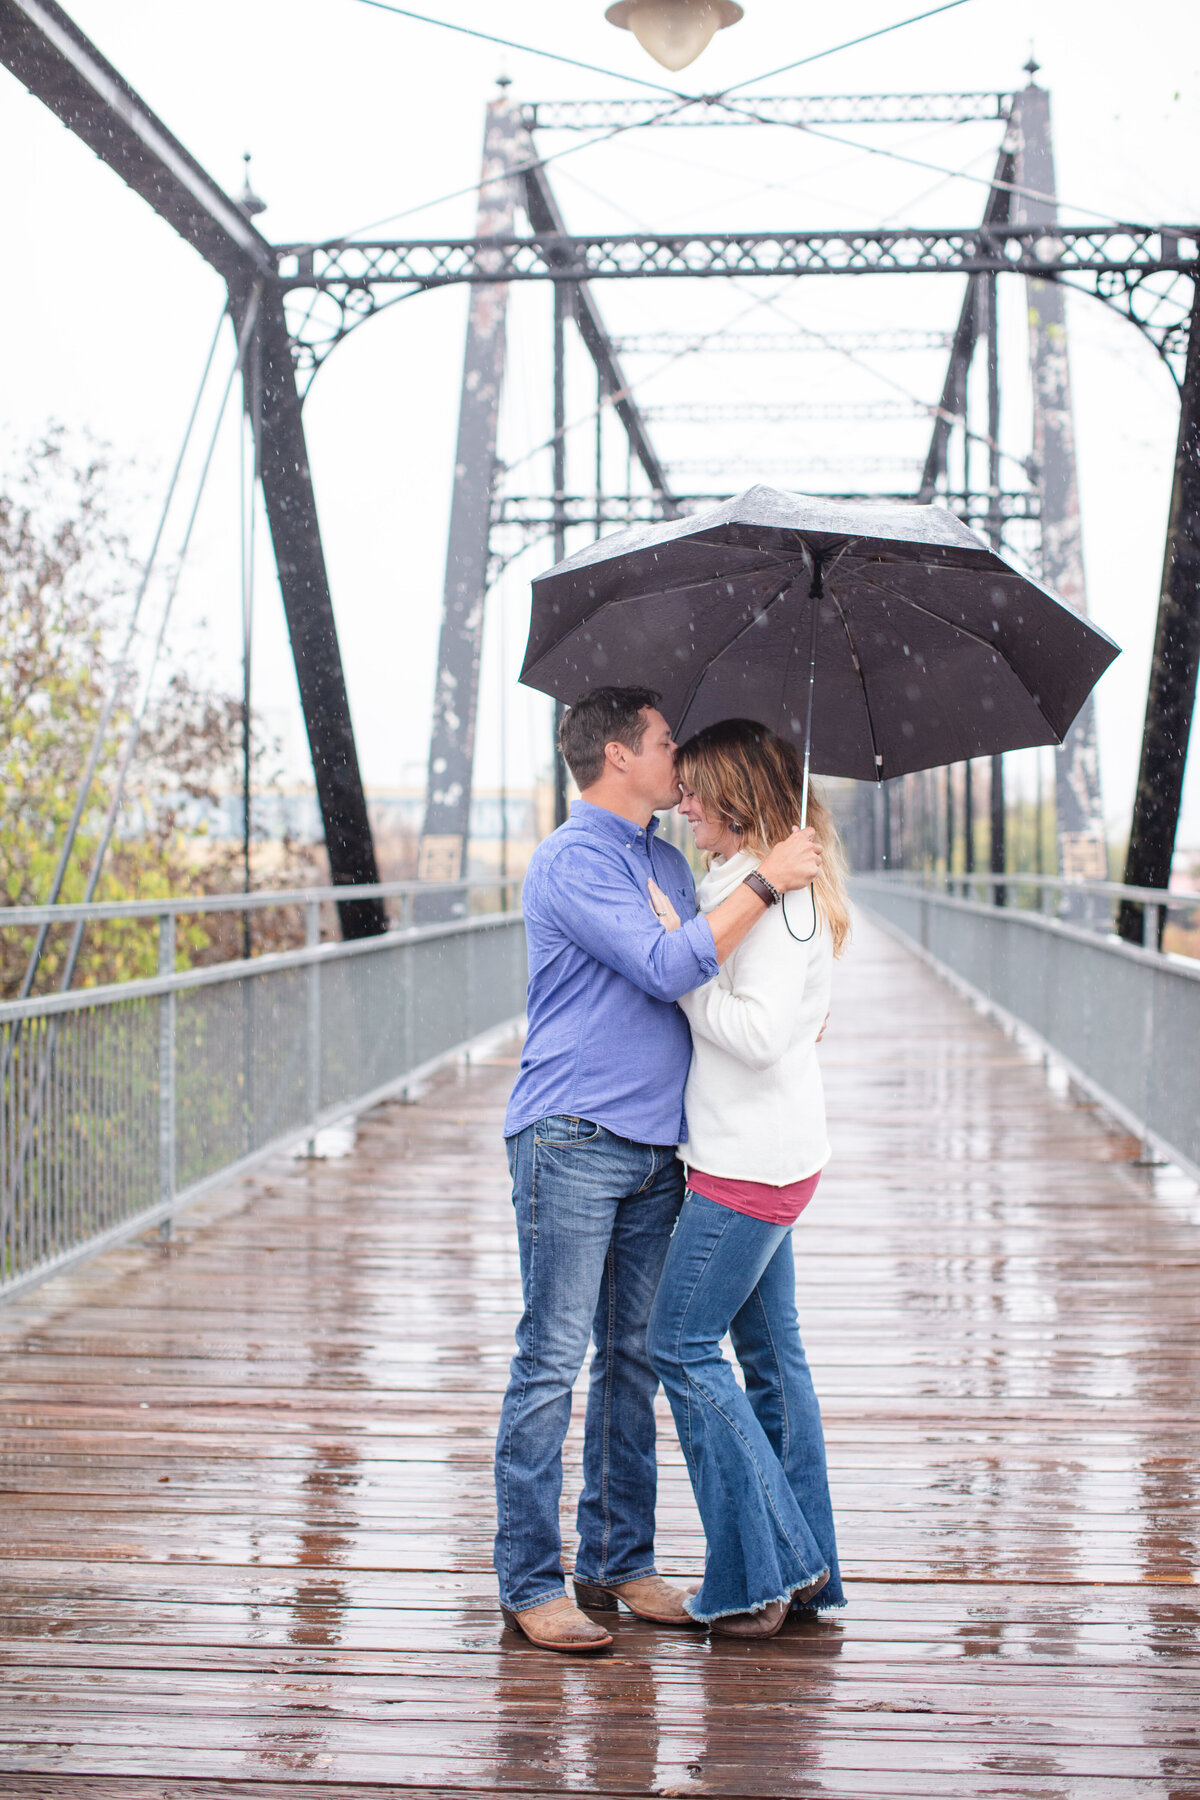 Faust Bridge in New Braunfels Texas couple stands in rain holding umbrella by Firefly Photography